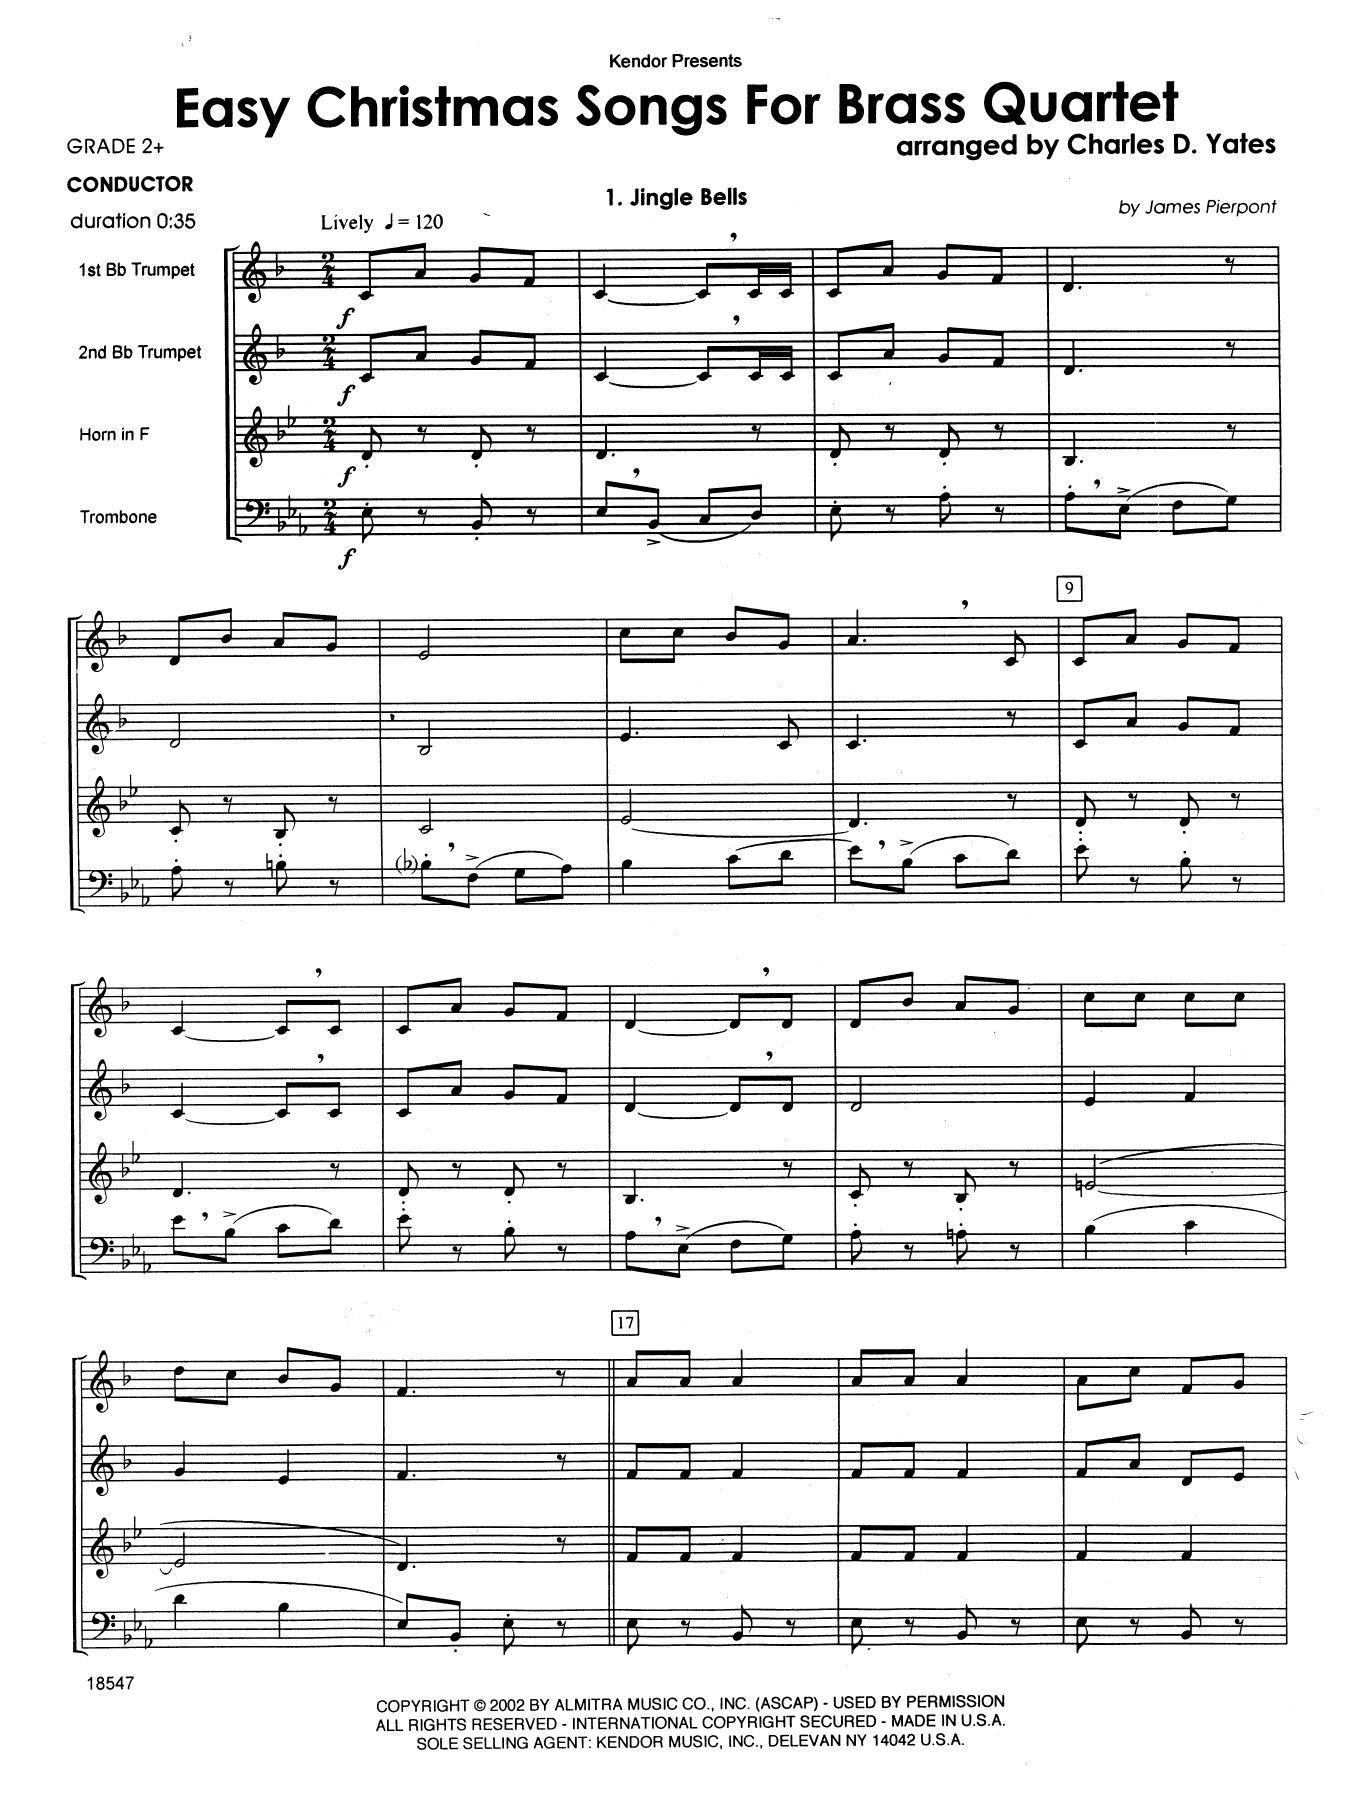 Download Charles D. Yates Easy Christmas Songs For Brass Quartet Sheet Music